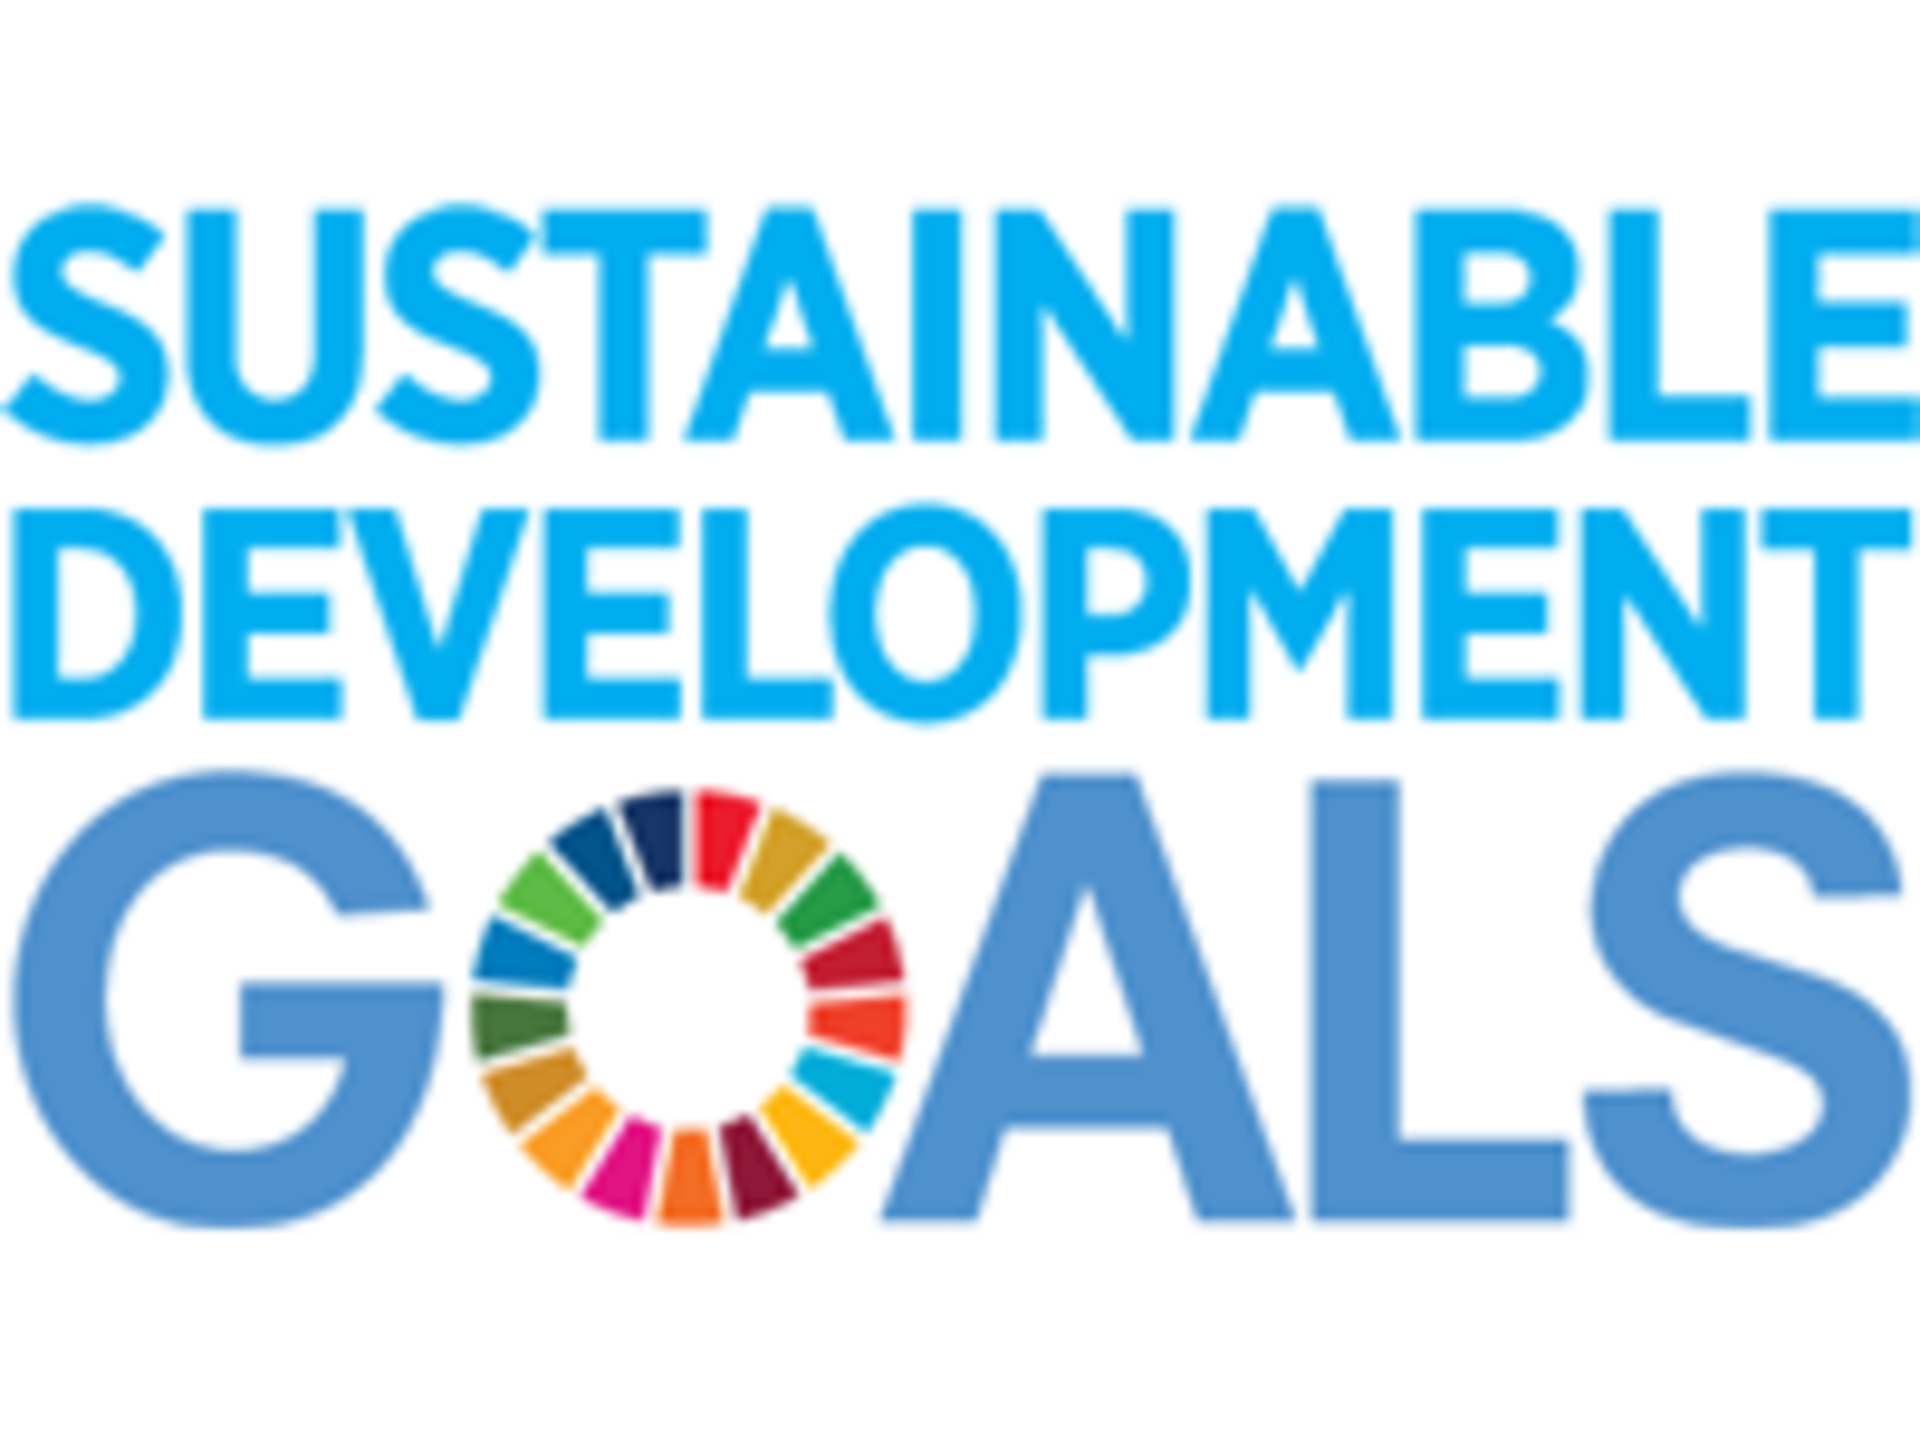 sutainable-development-goals-resize1920x1440.png